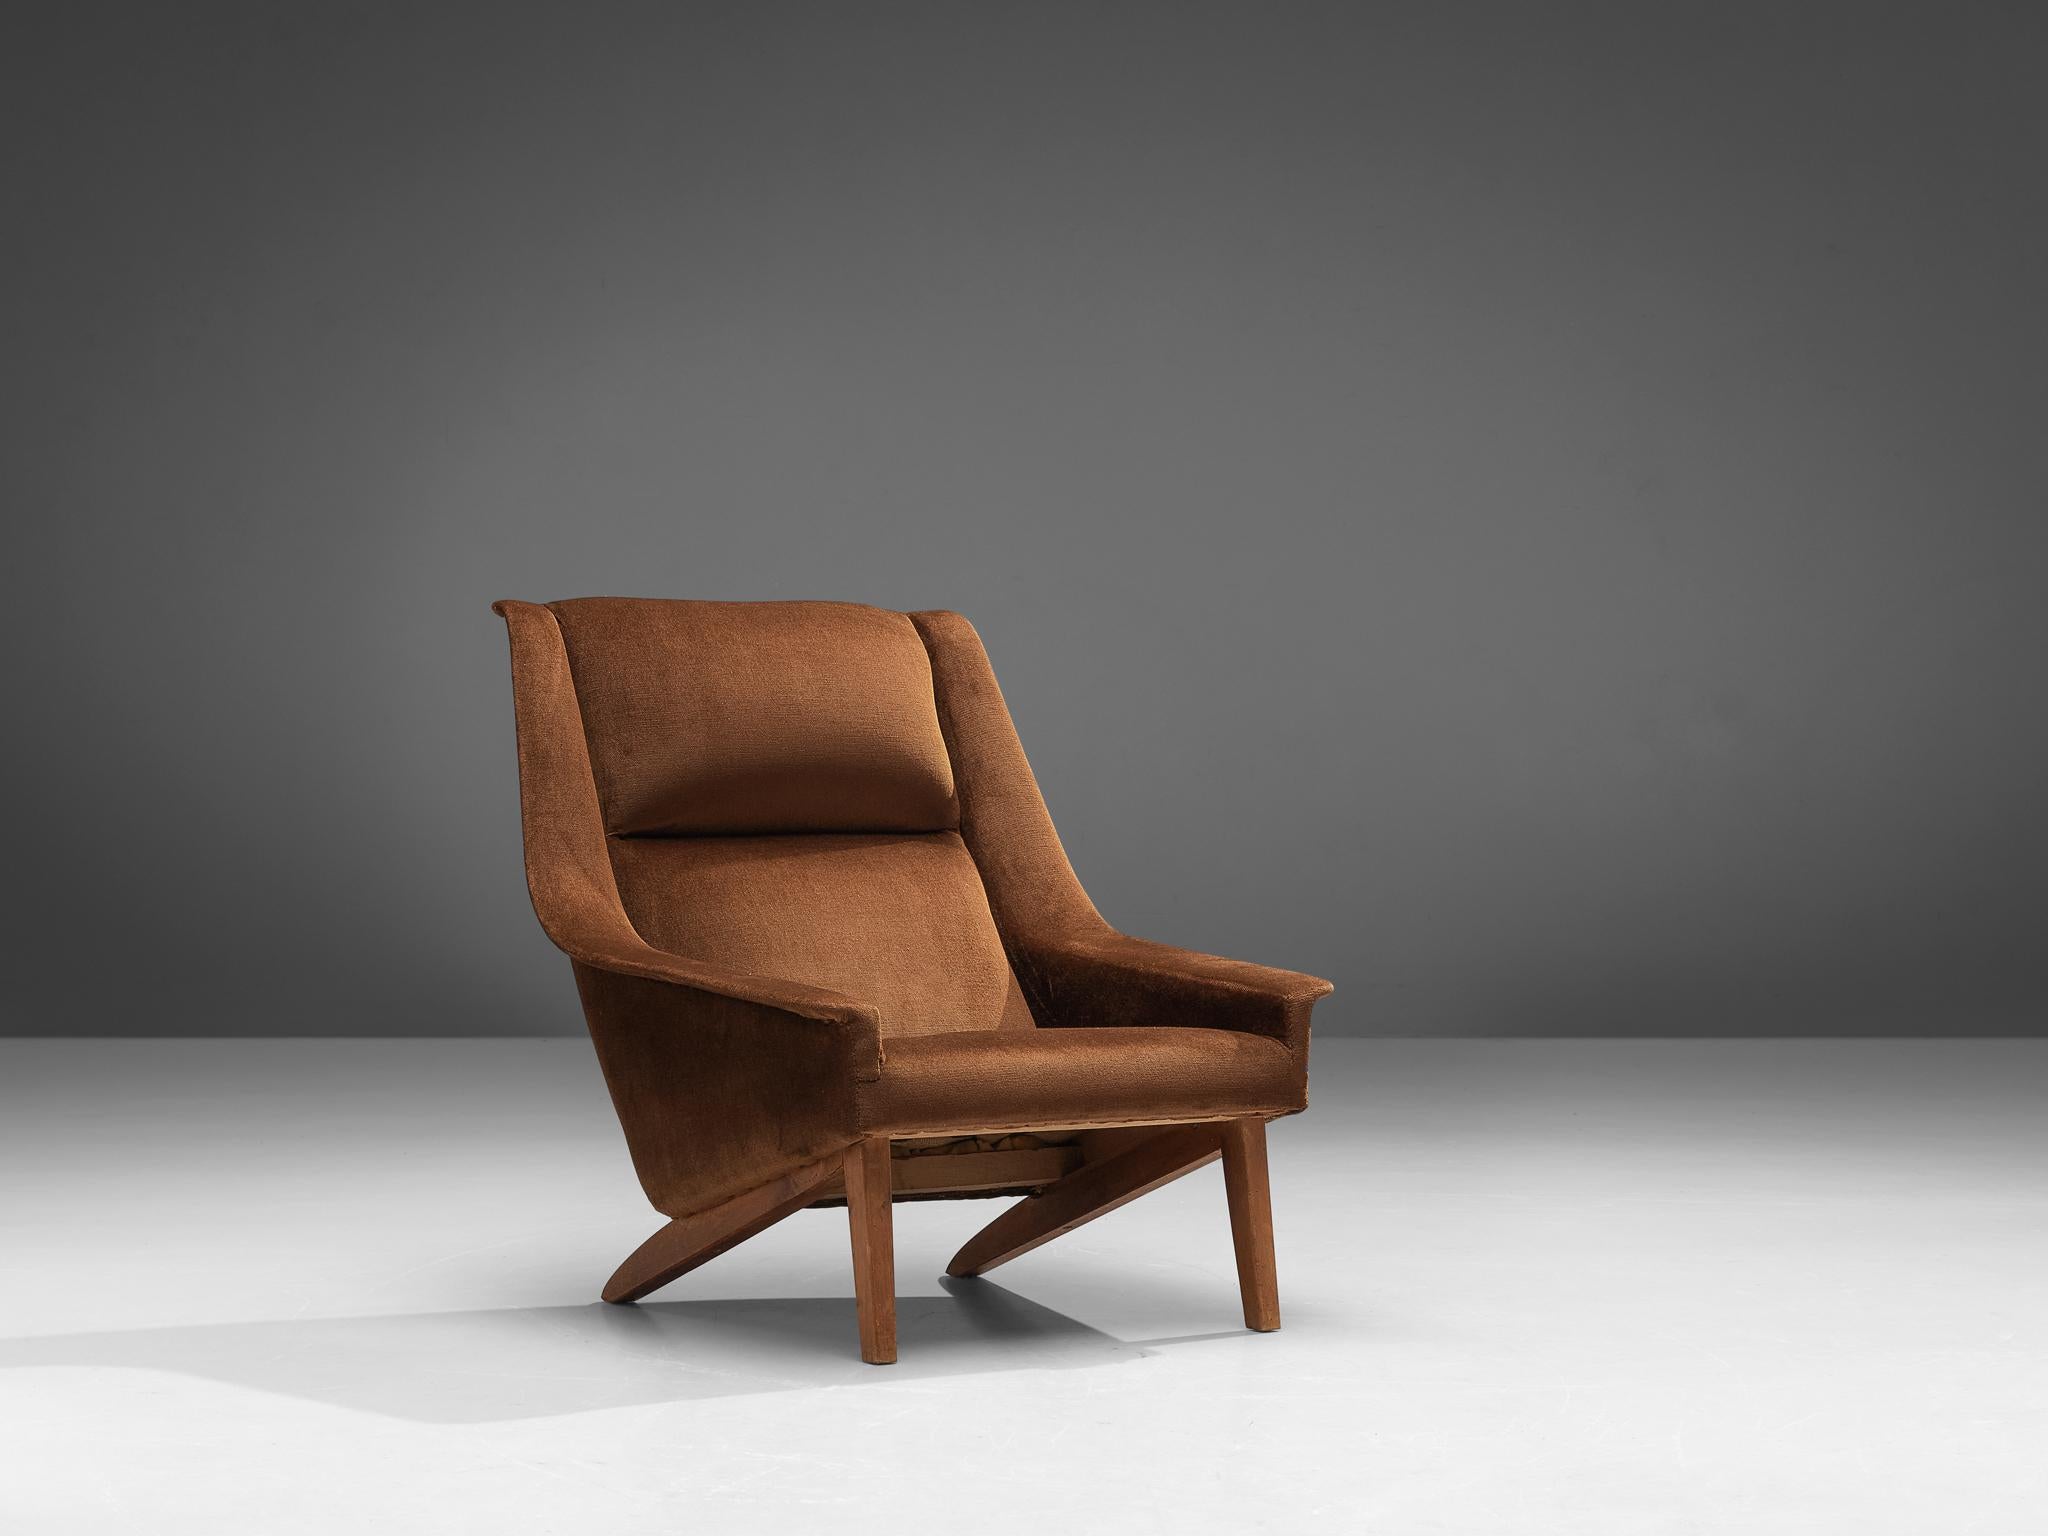 Folke Ohlsson for Fritz Hansen, lounge chair, model '4410', fabric, teak, Denmark, designed in 1957

Armchair by Folke Ohlsson made in Denmark in the 1950s. This high quality lounge chair is characterized by a stylish timeless design based on